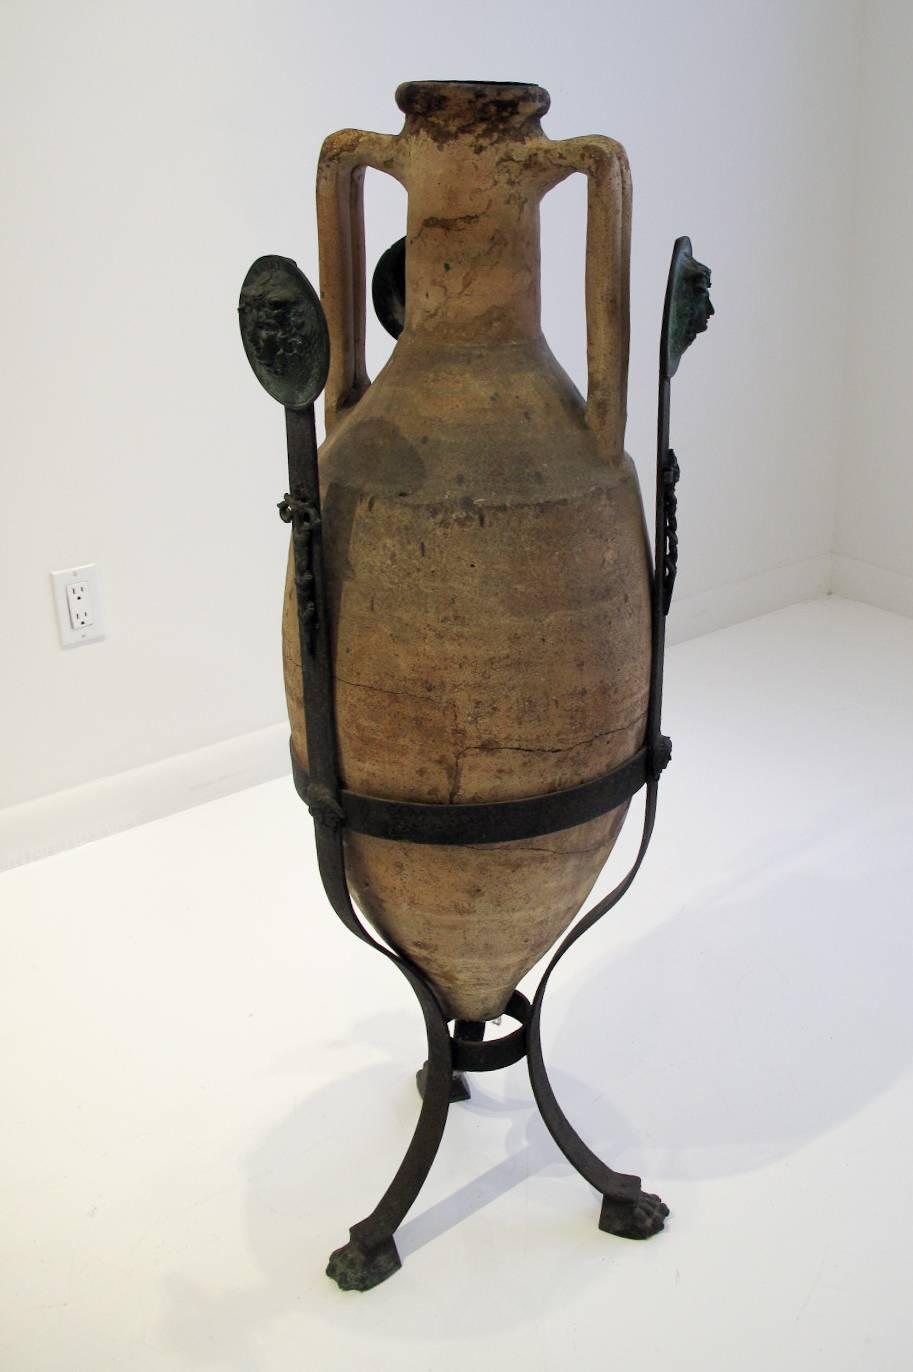 Large Roman Amphora resting on a neoclassical iron tripod stand with patinated bronze Medusa medallions and lion paws feet. The Amphora dates back to the Roman Empire era and is set in a grand tour stand dating back to the late eighteen or early